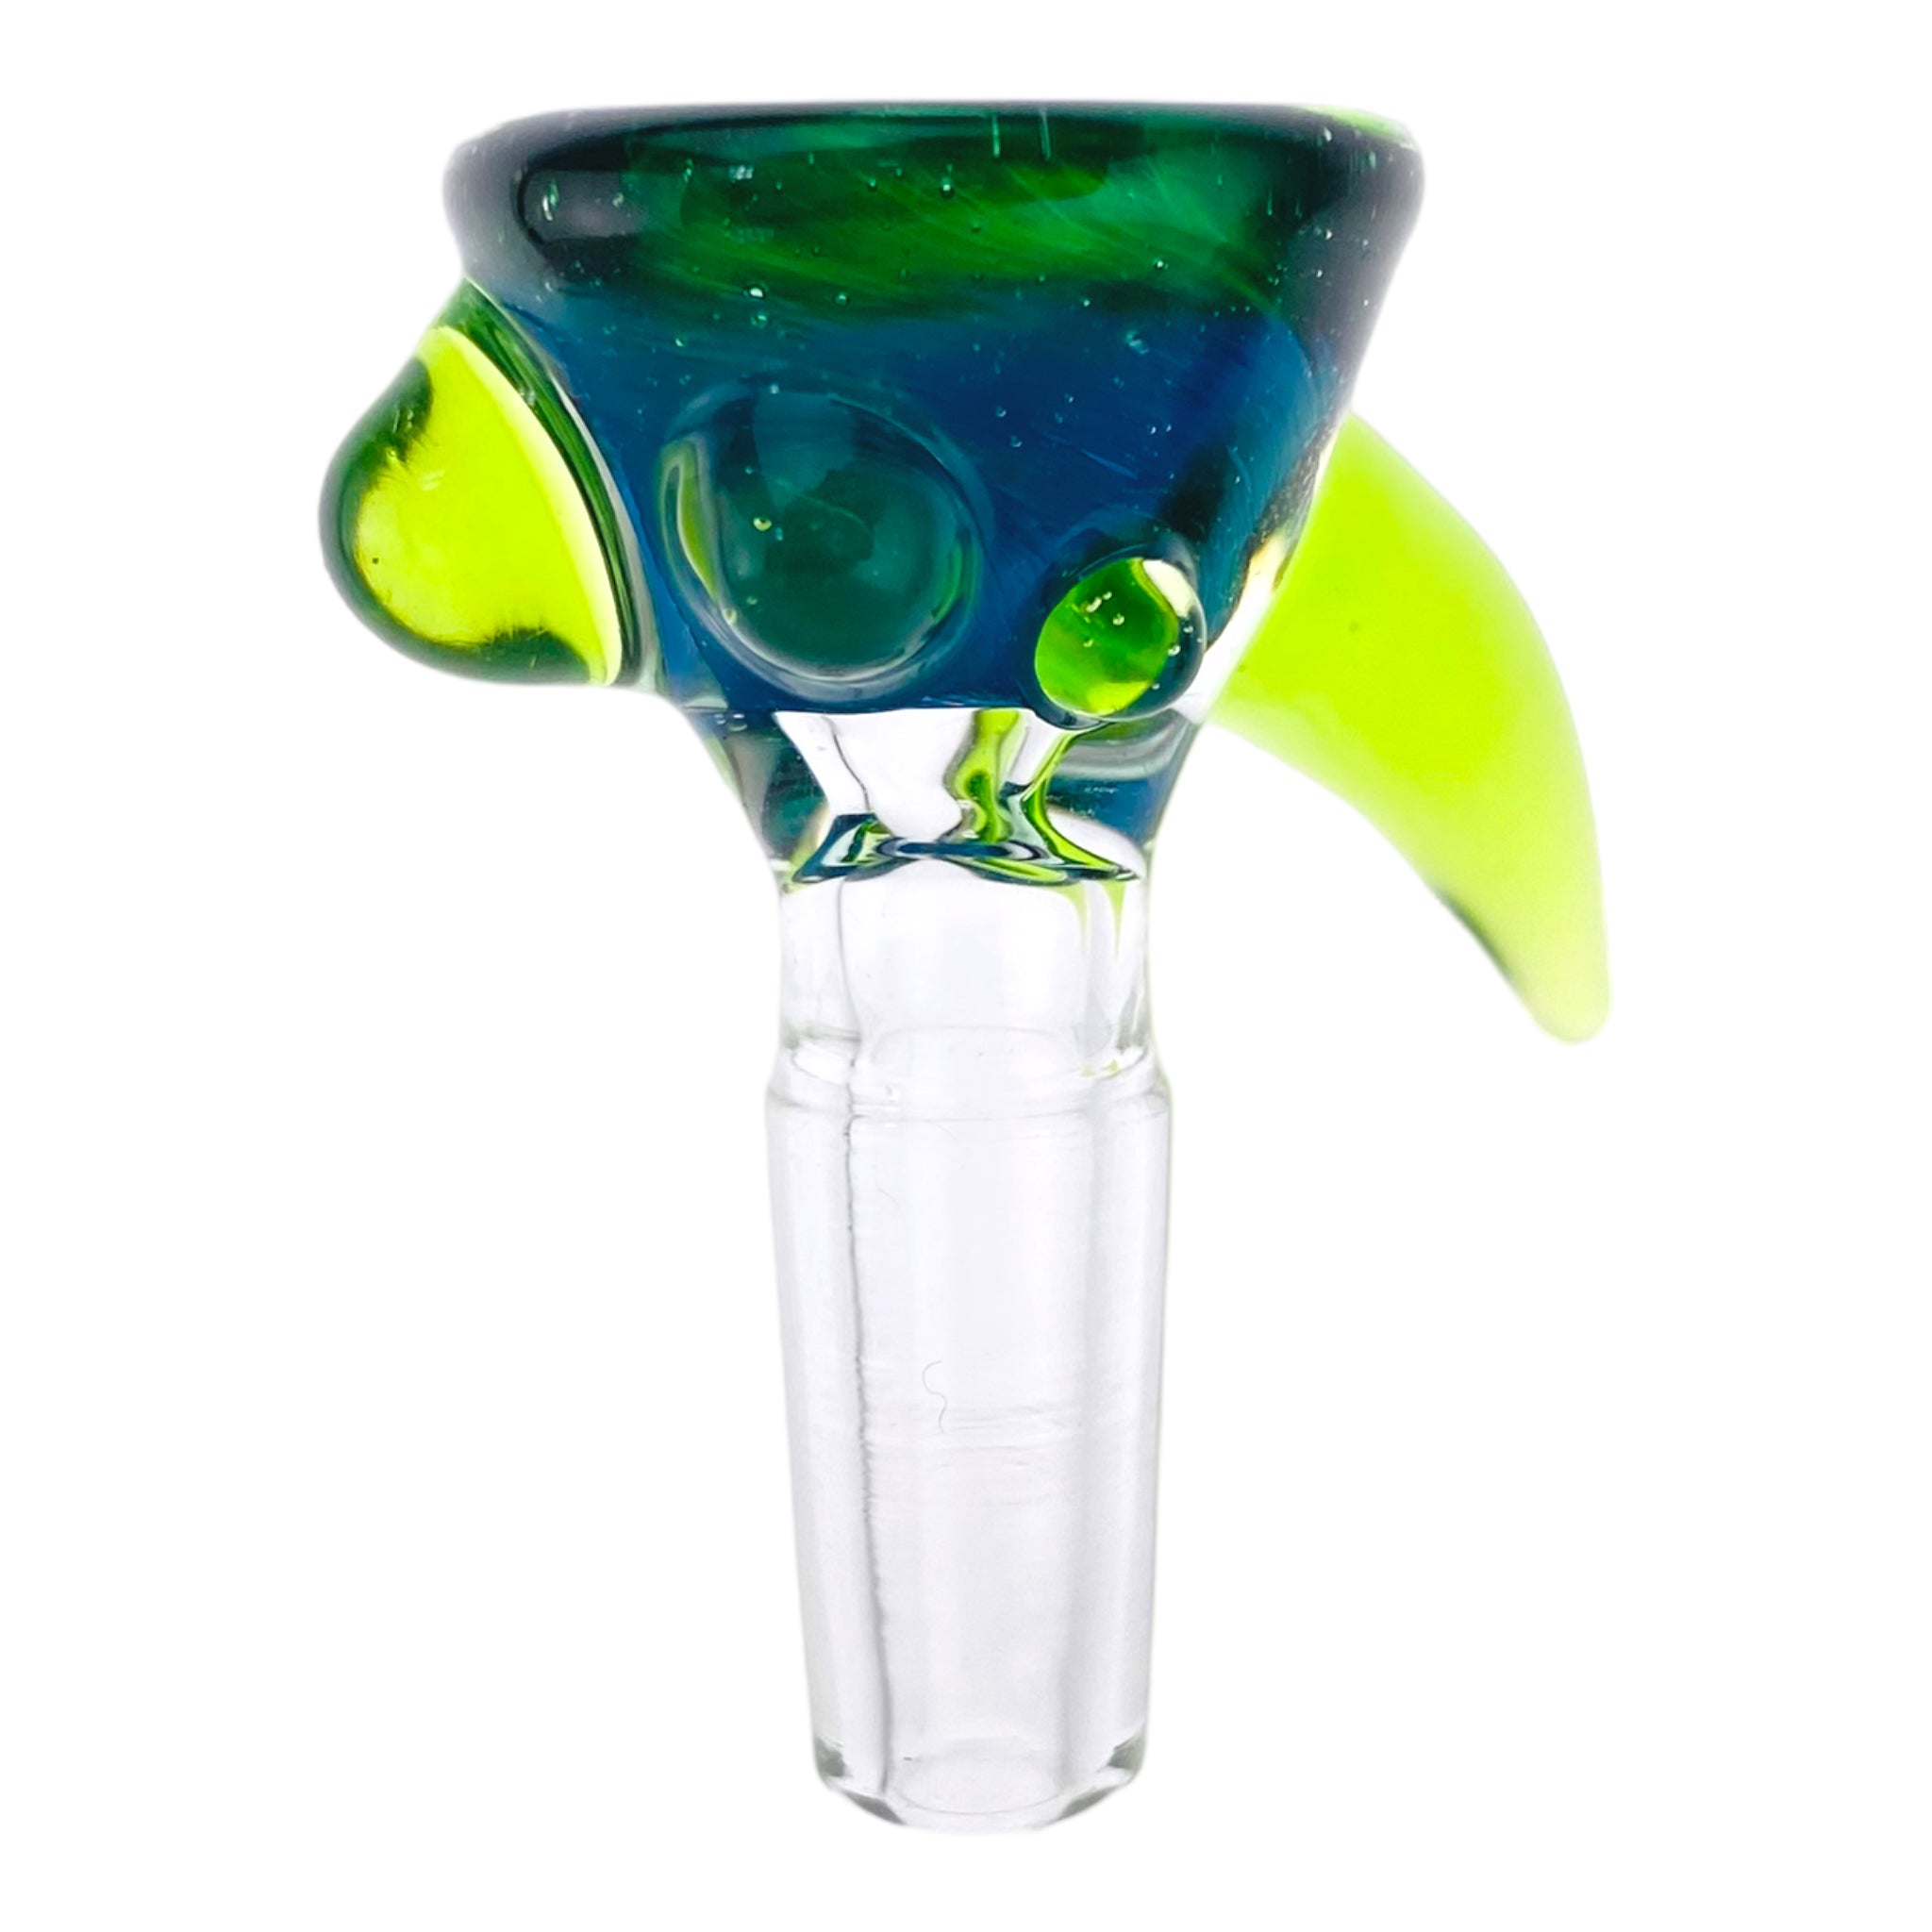 Arko Glass - 10mm Flower Bowl - Green Money With Slyme Green Handle & Dots